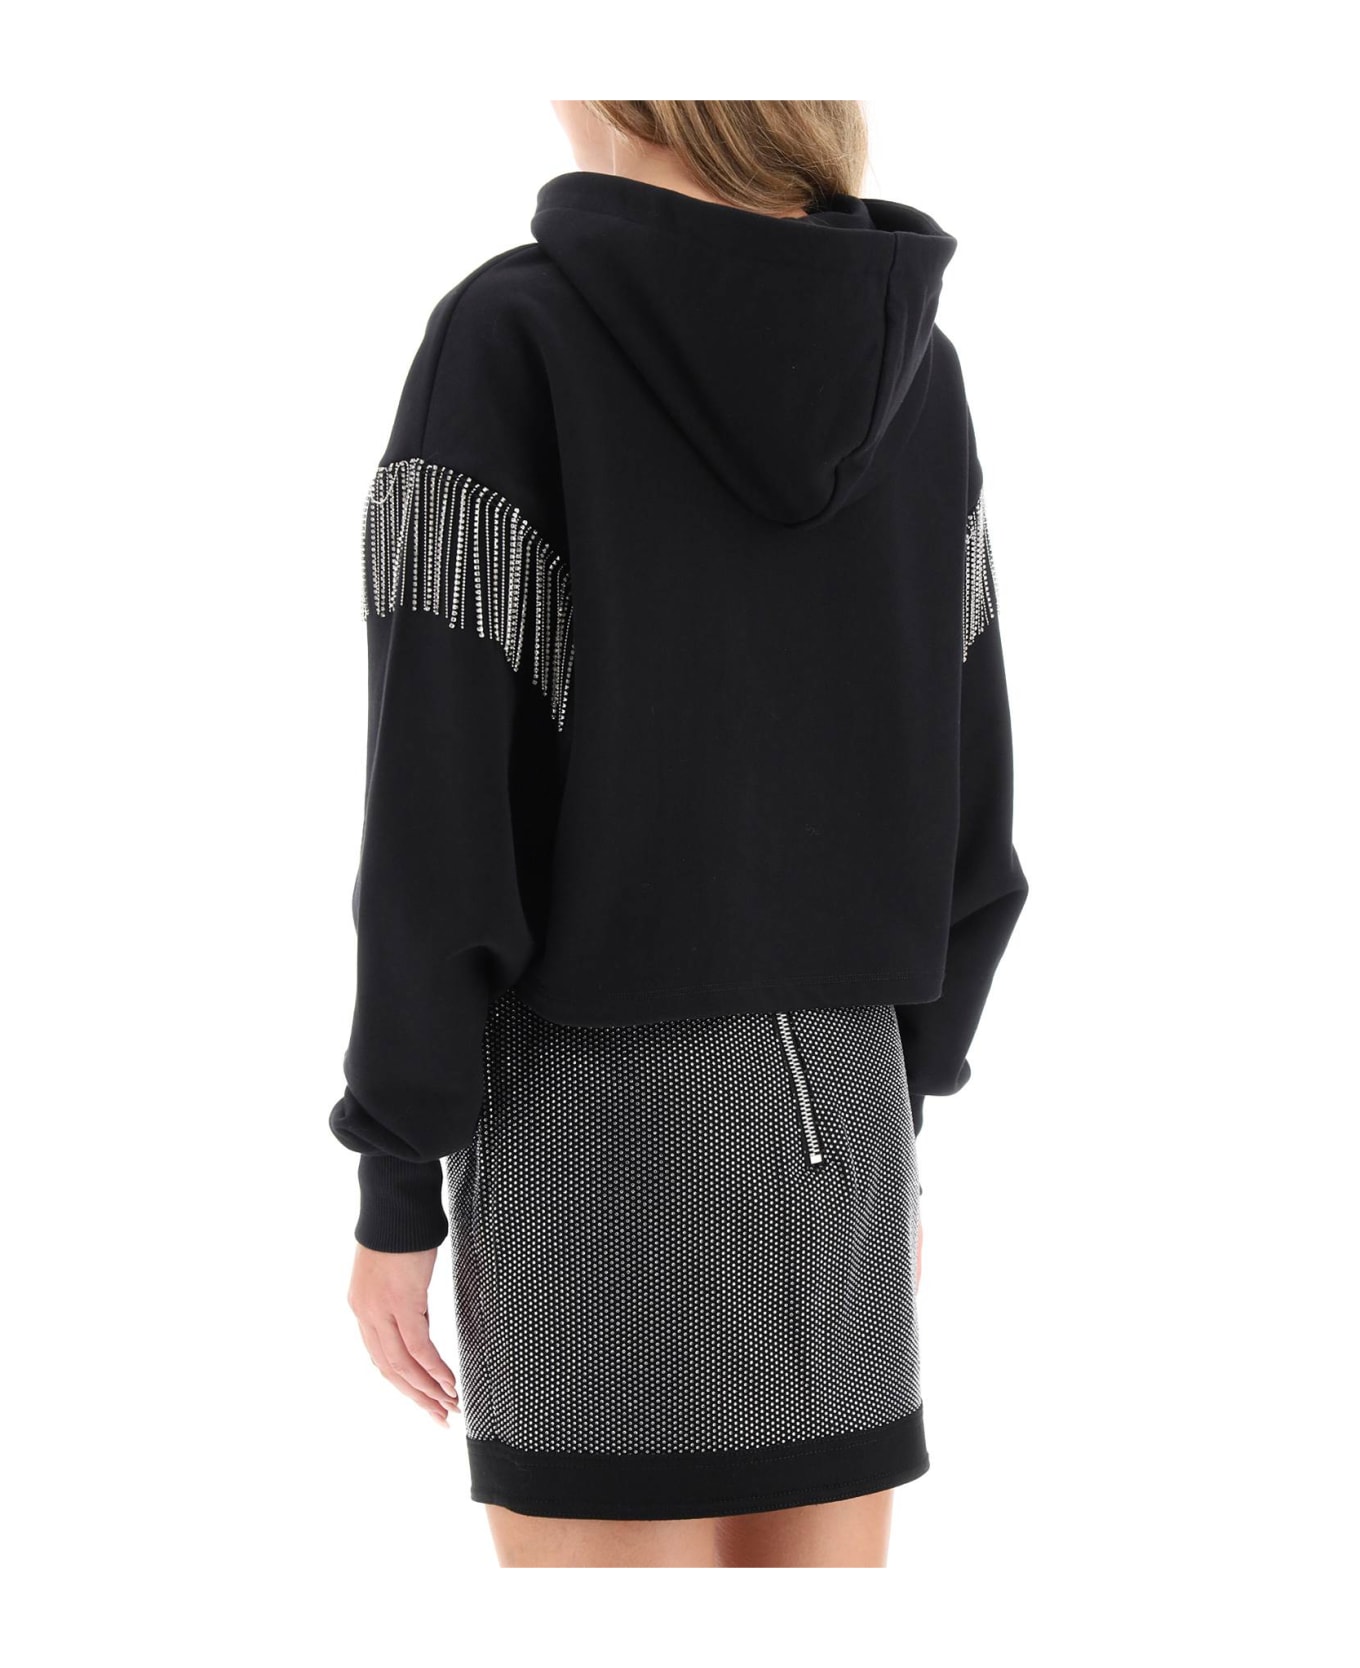 Balmain Cropped Hoodie With Rhinestone-studded Logo And Crystal Cupchains - NOIR CRISTAL (Black)